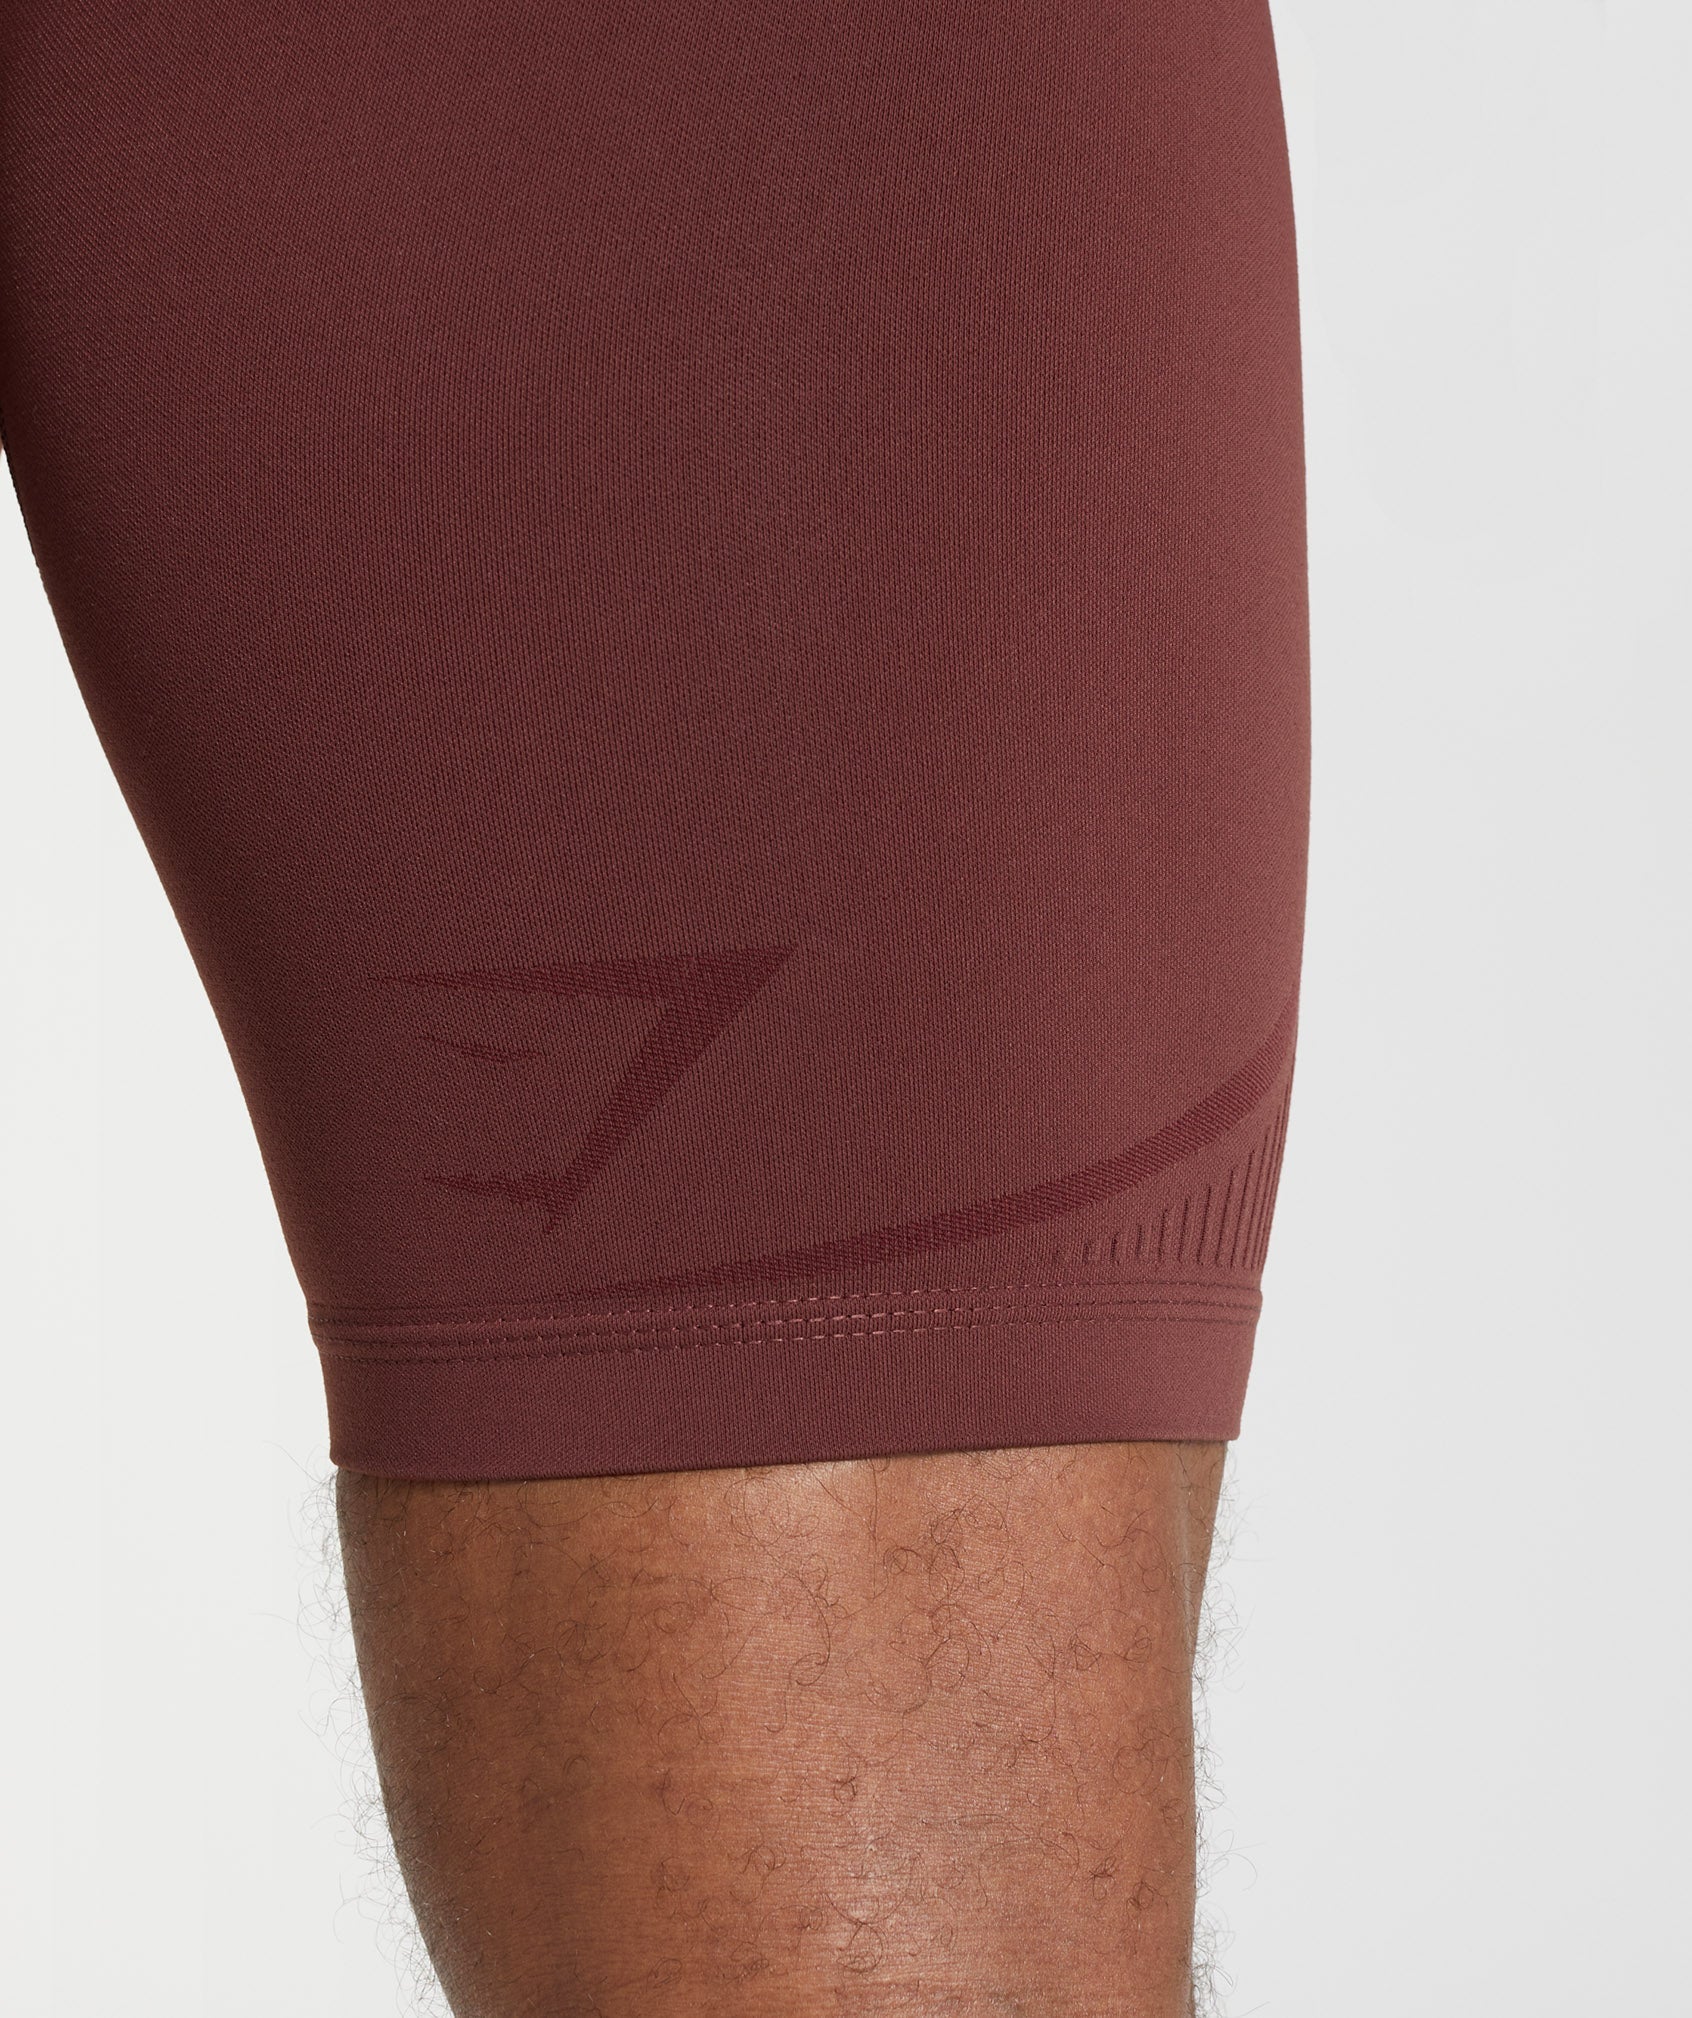 315 Seamless 1/2 Shorts in Cherry Brown/Athletic Maroon - view 5